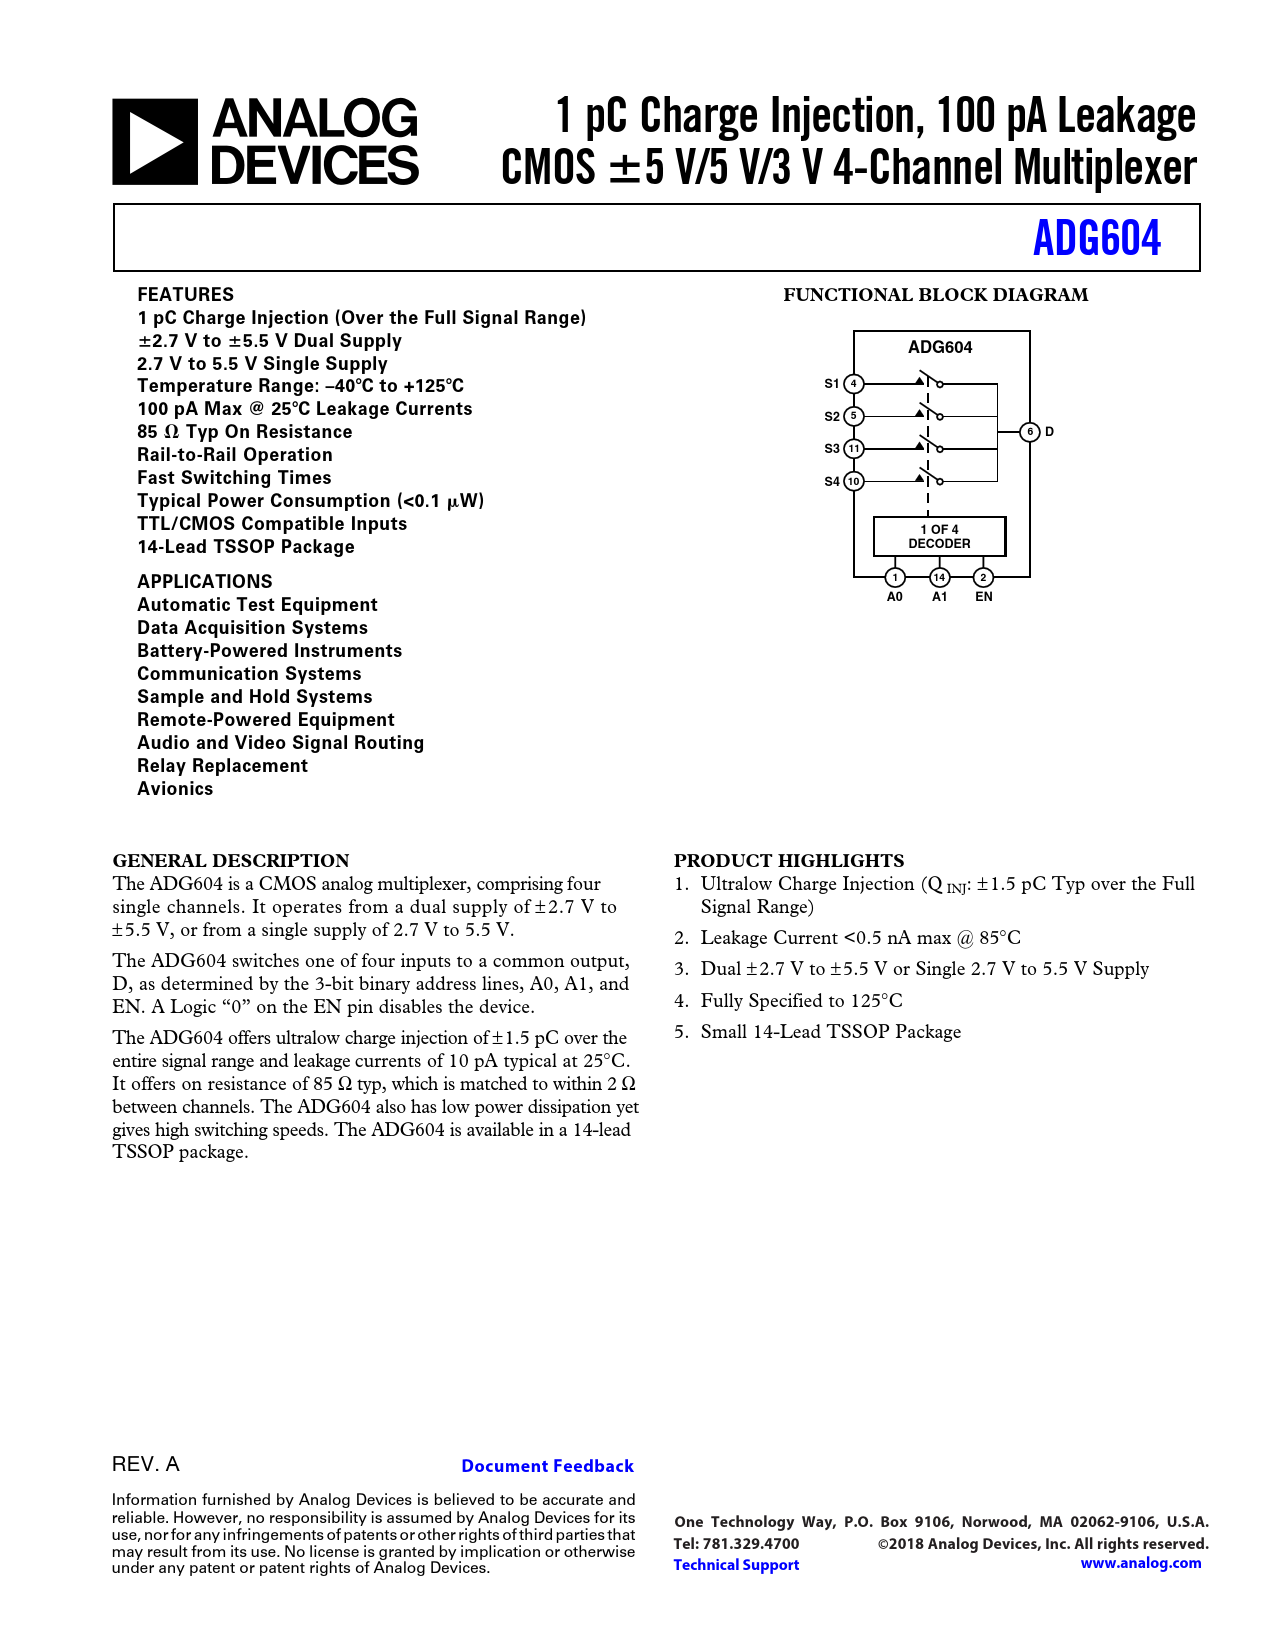 Datasheet ADG604 Analog Devices, Revision: A